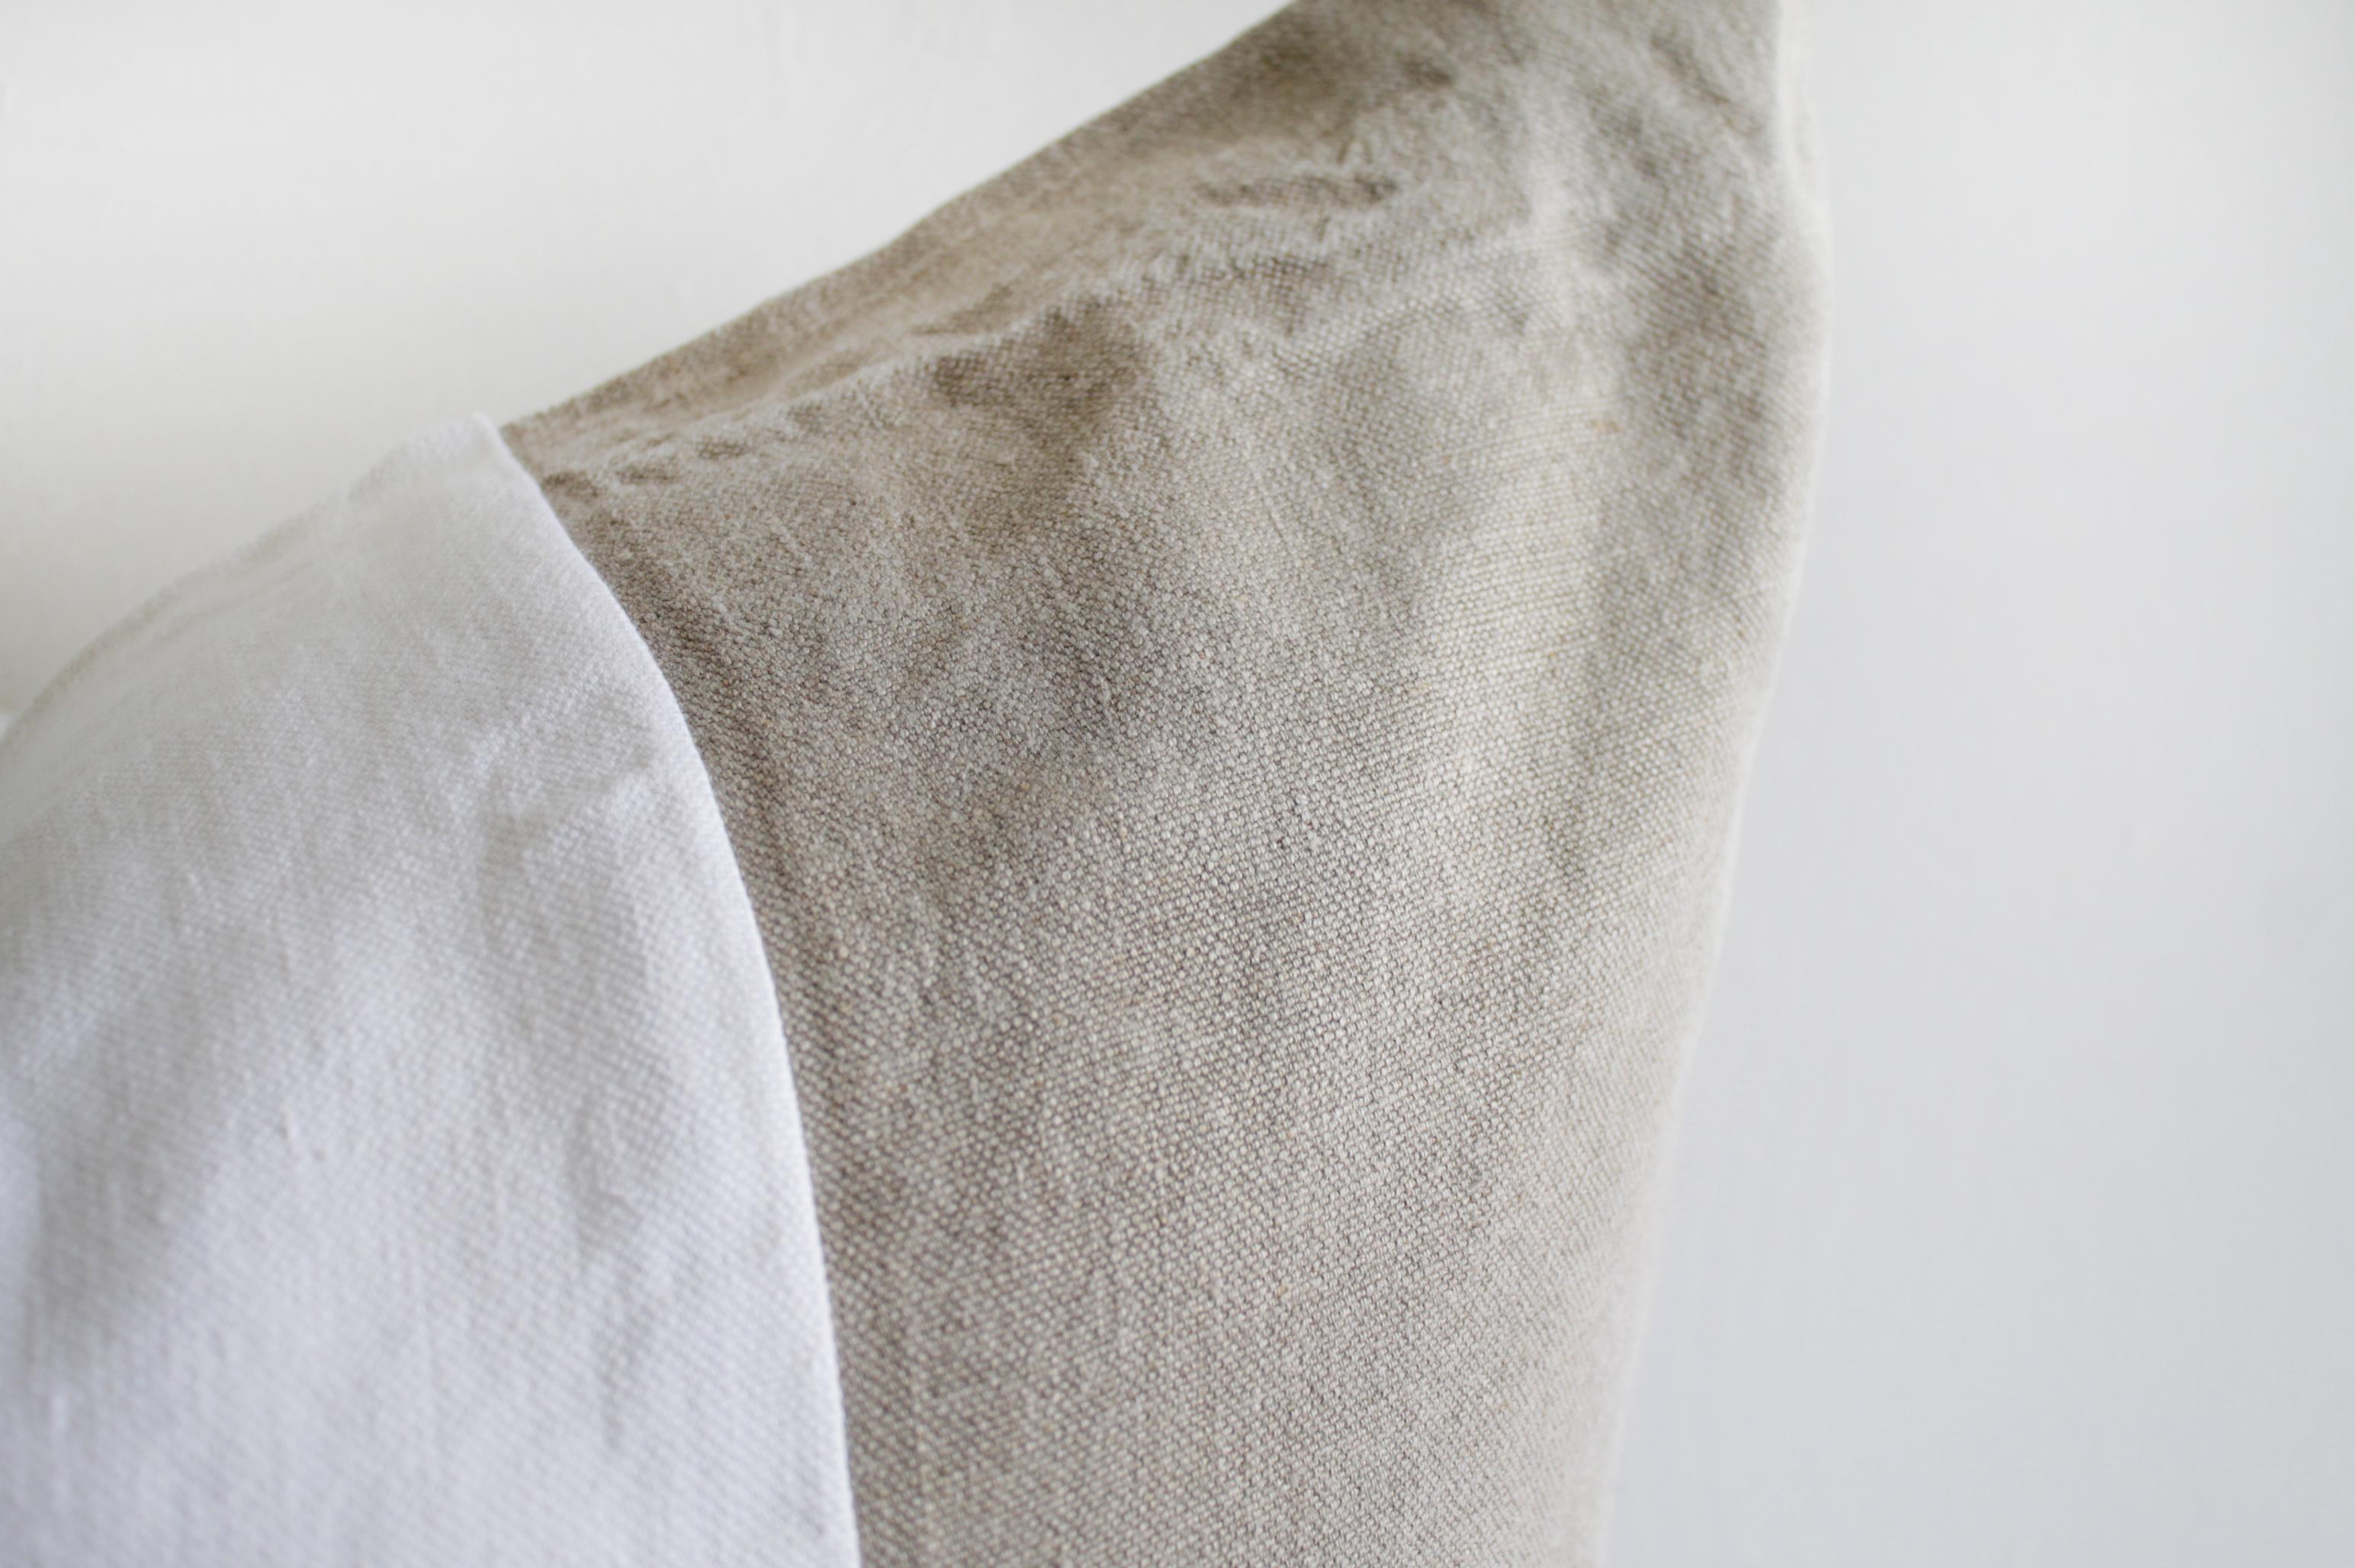 Custom made Belgian linen euro shams natural and white colorblock
Size: 26